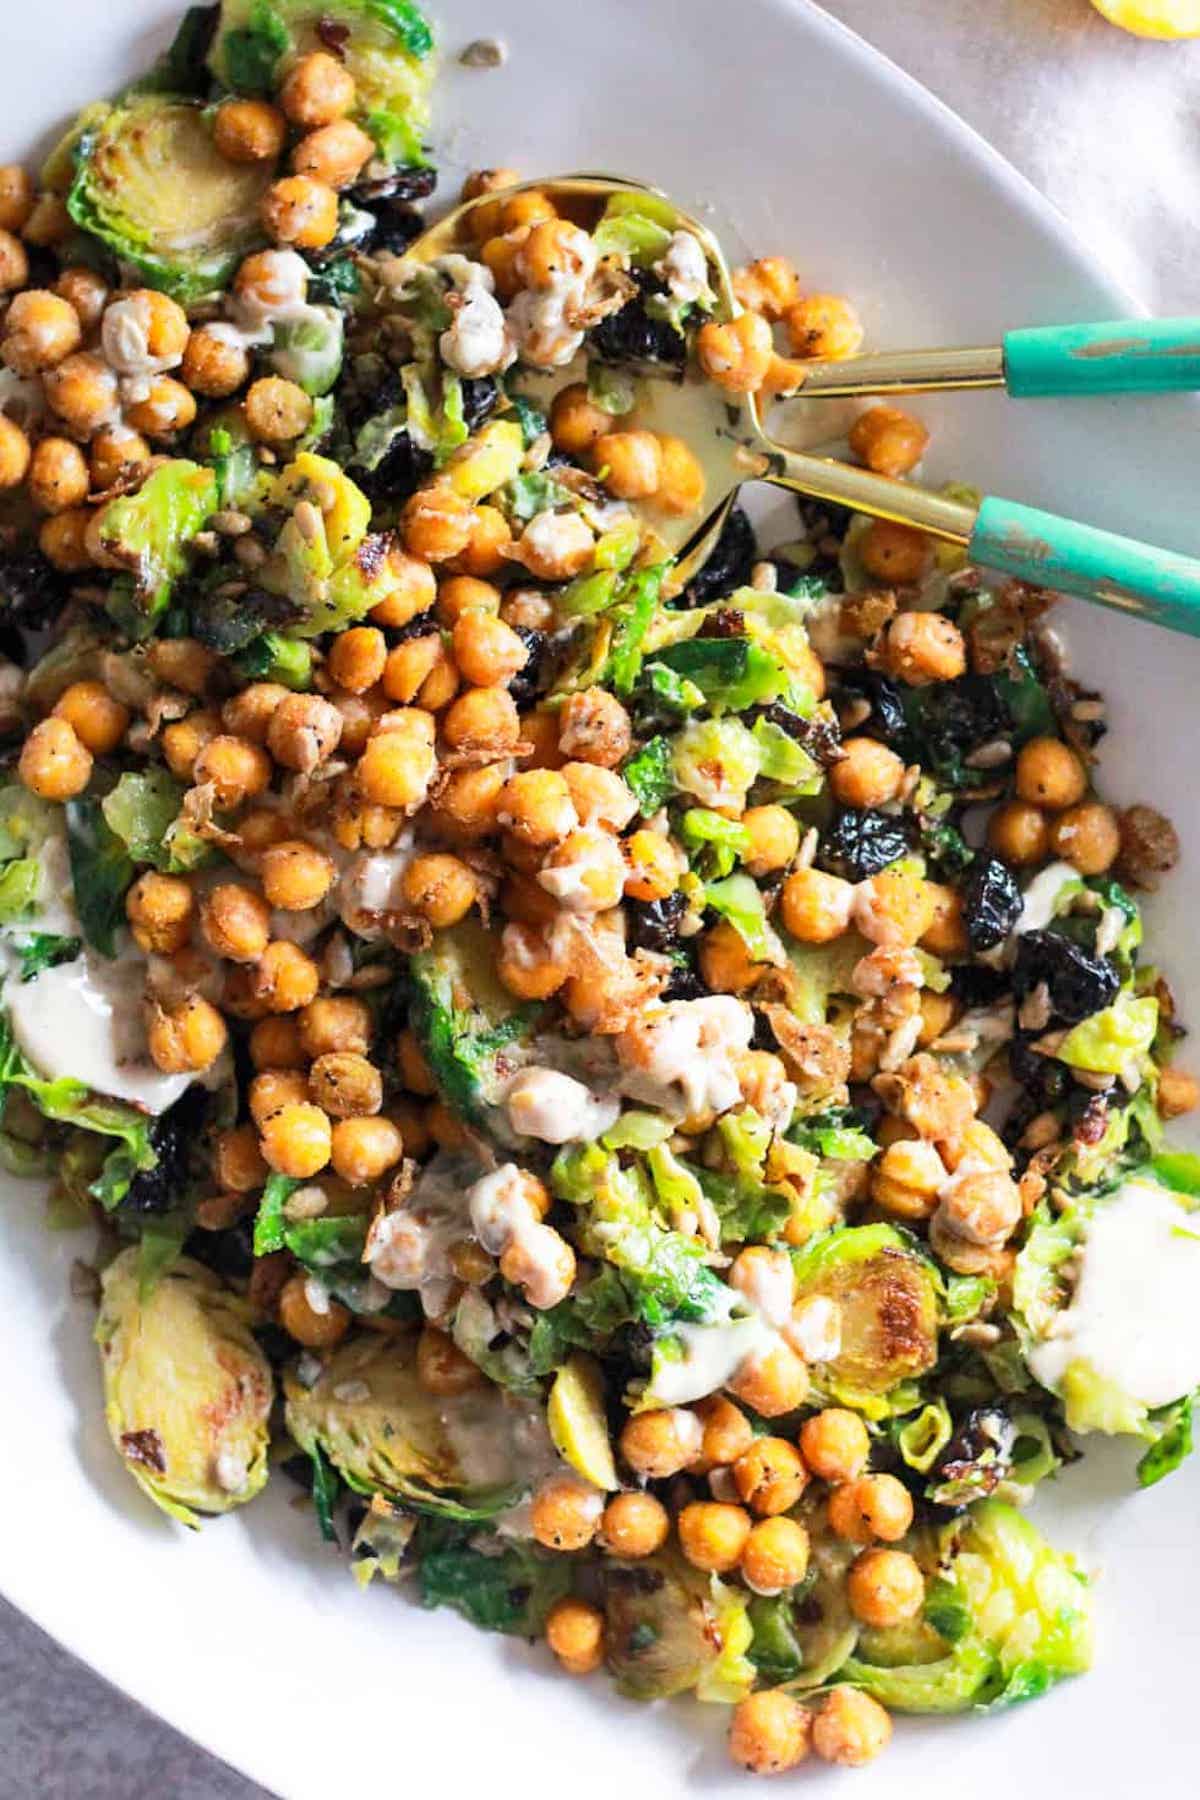 Brussel sprouts and chickpeas dinner.